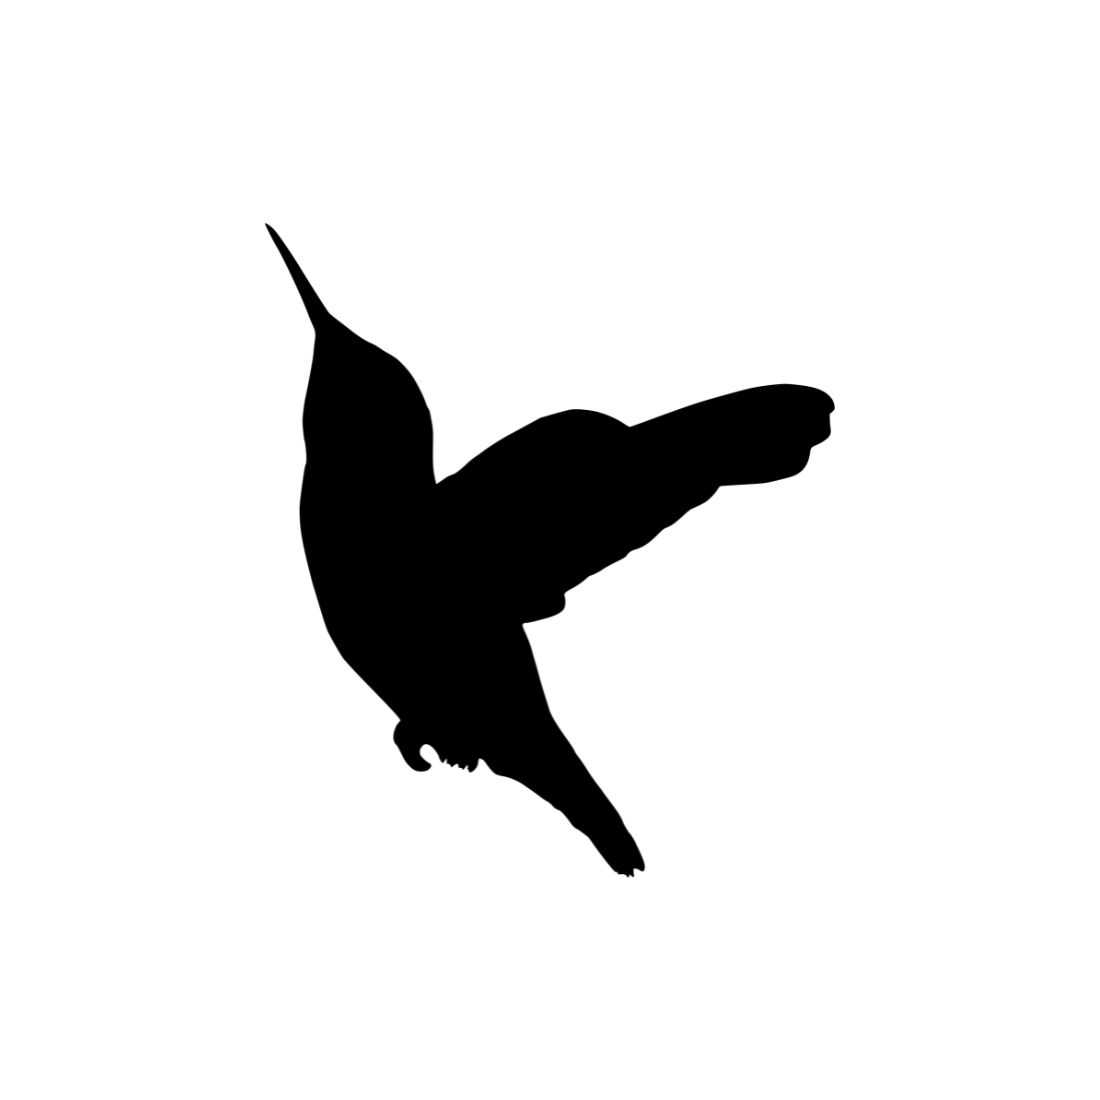 Hummingbird Silhouette collection.